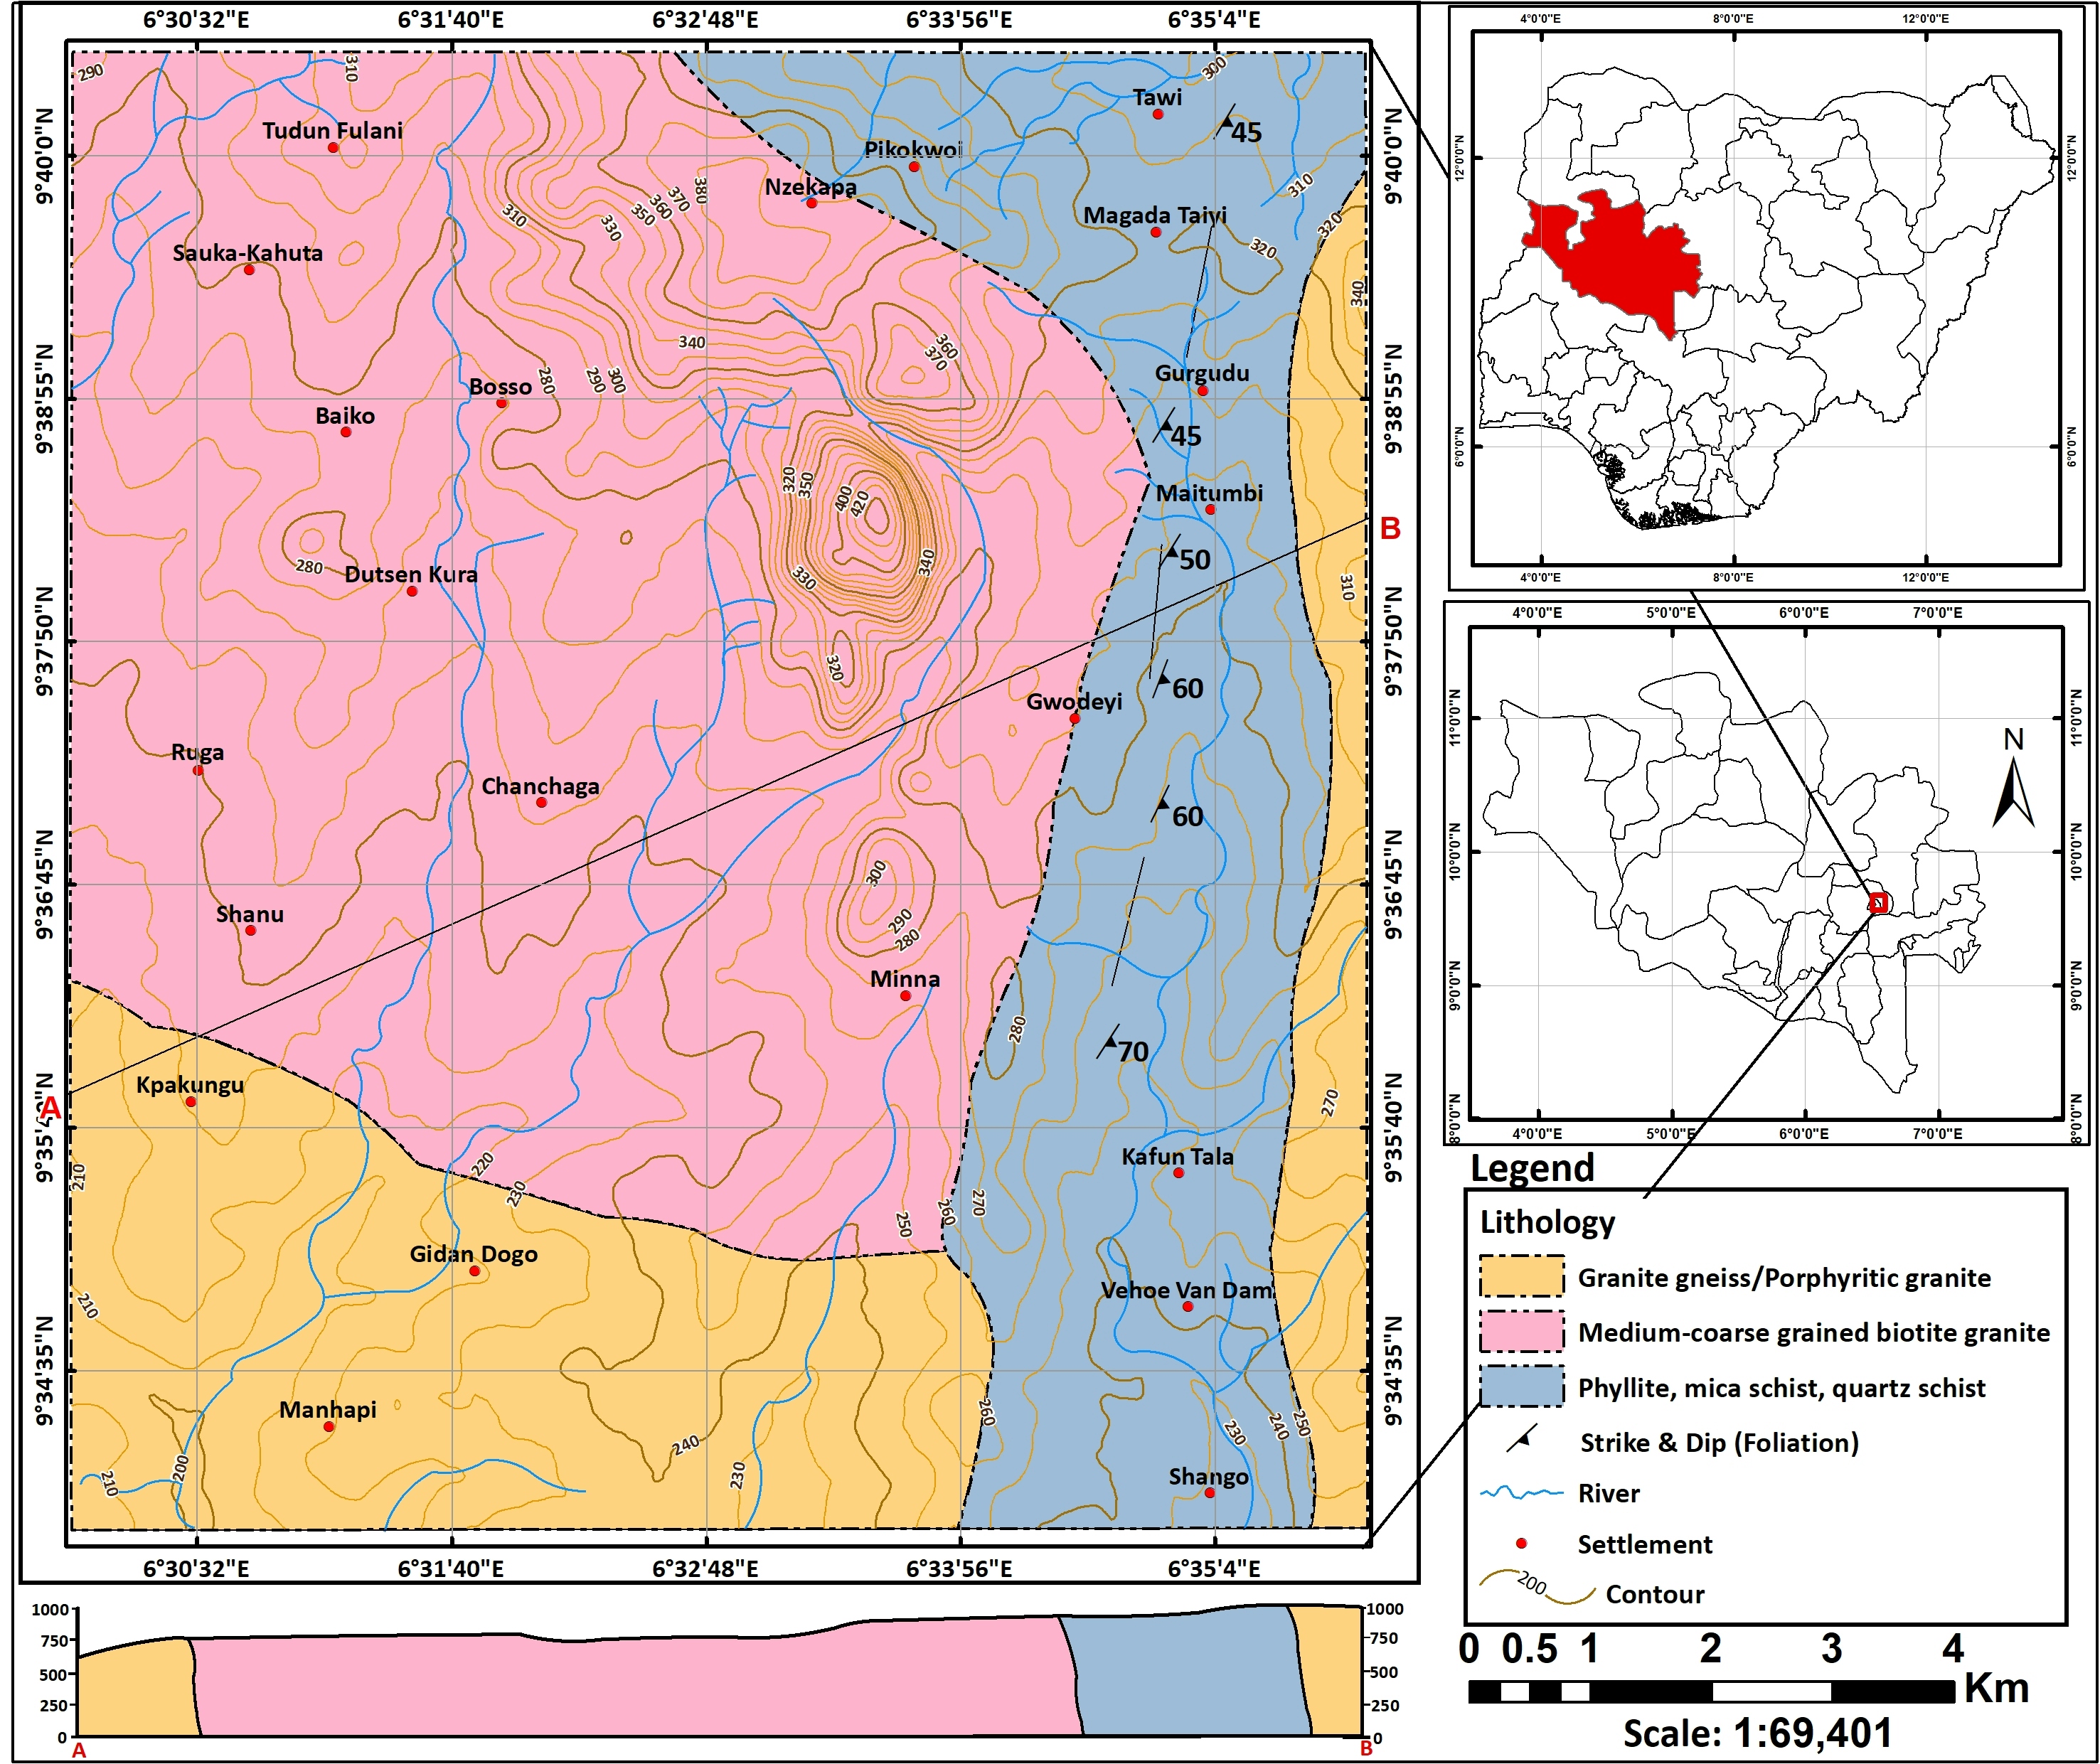 Geology map of Minna, Niger state